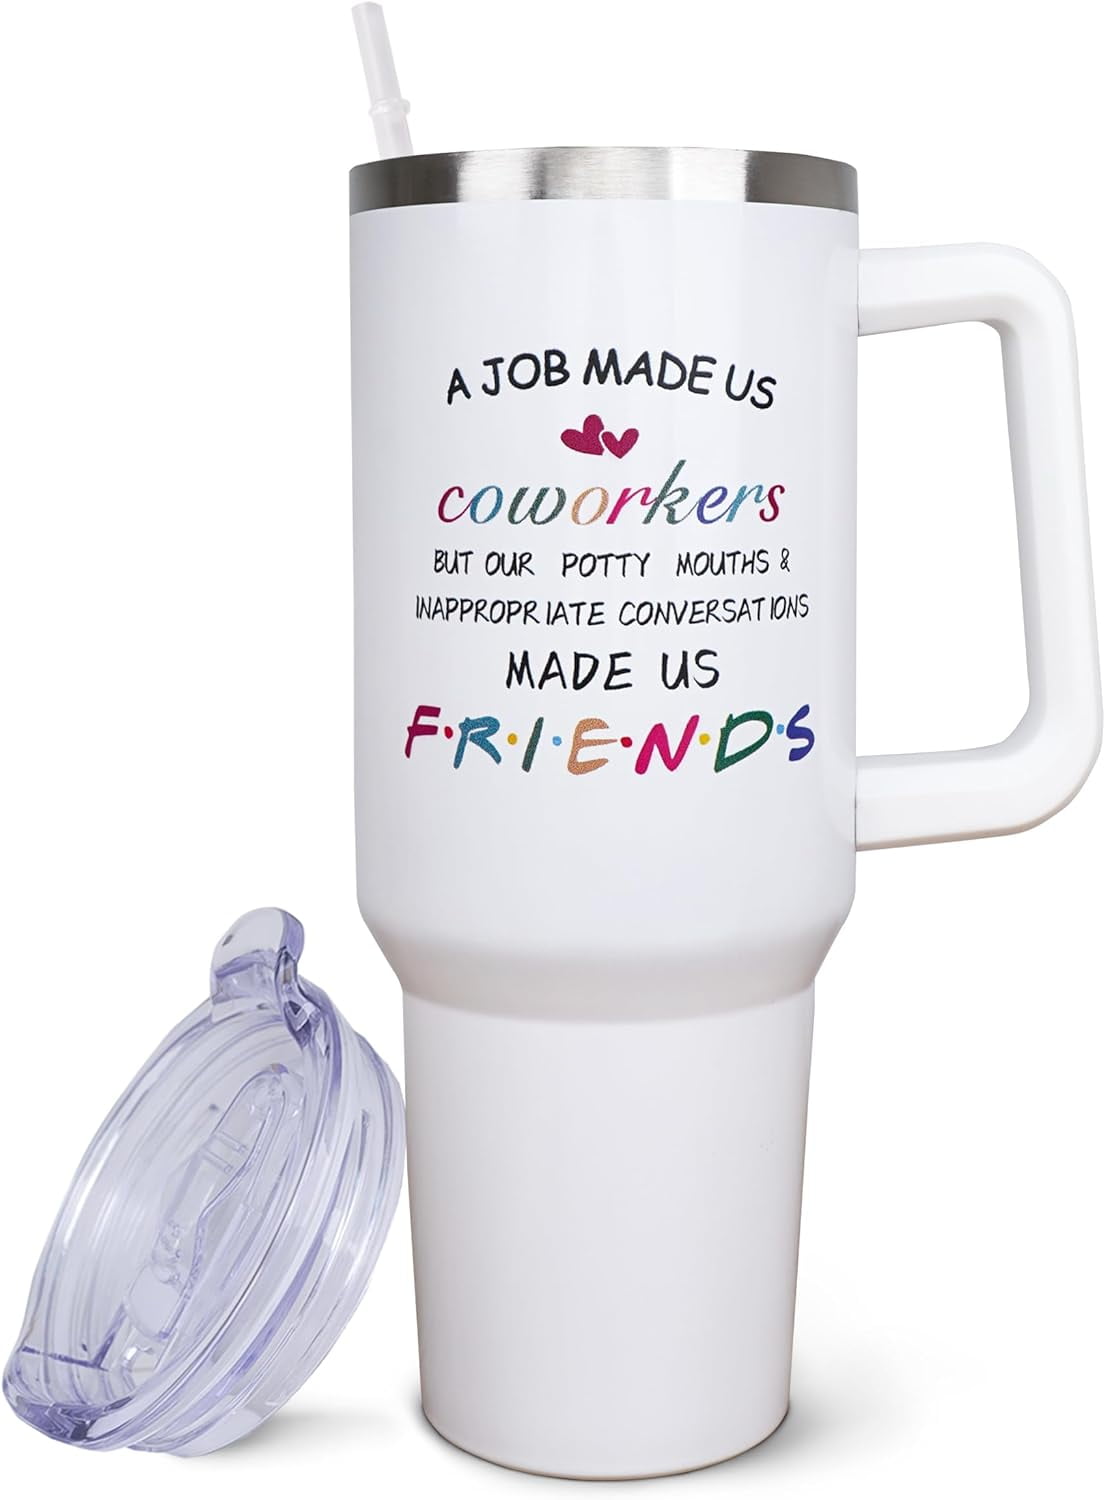 Glass tumbler - Thank you for being my emotional support coworker - Bestie  Personalized Custom Glass tumbler - Gift For Best Friends, BFF, Sisters